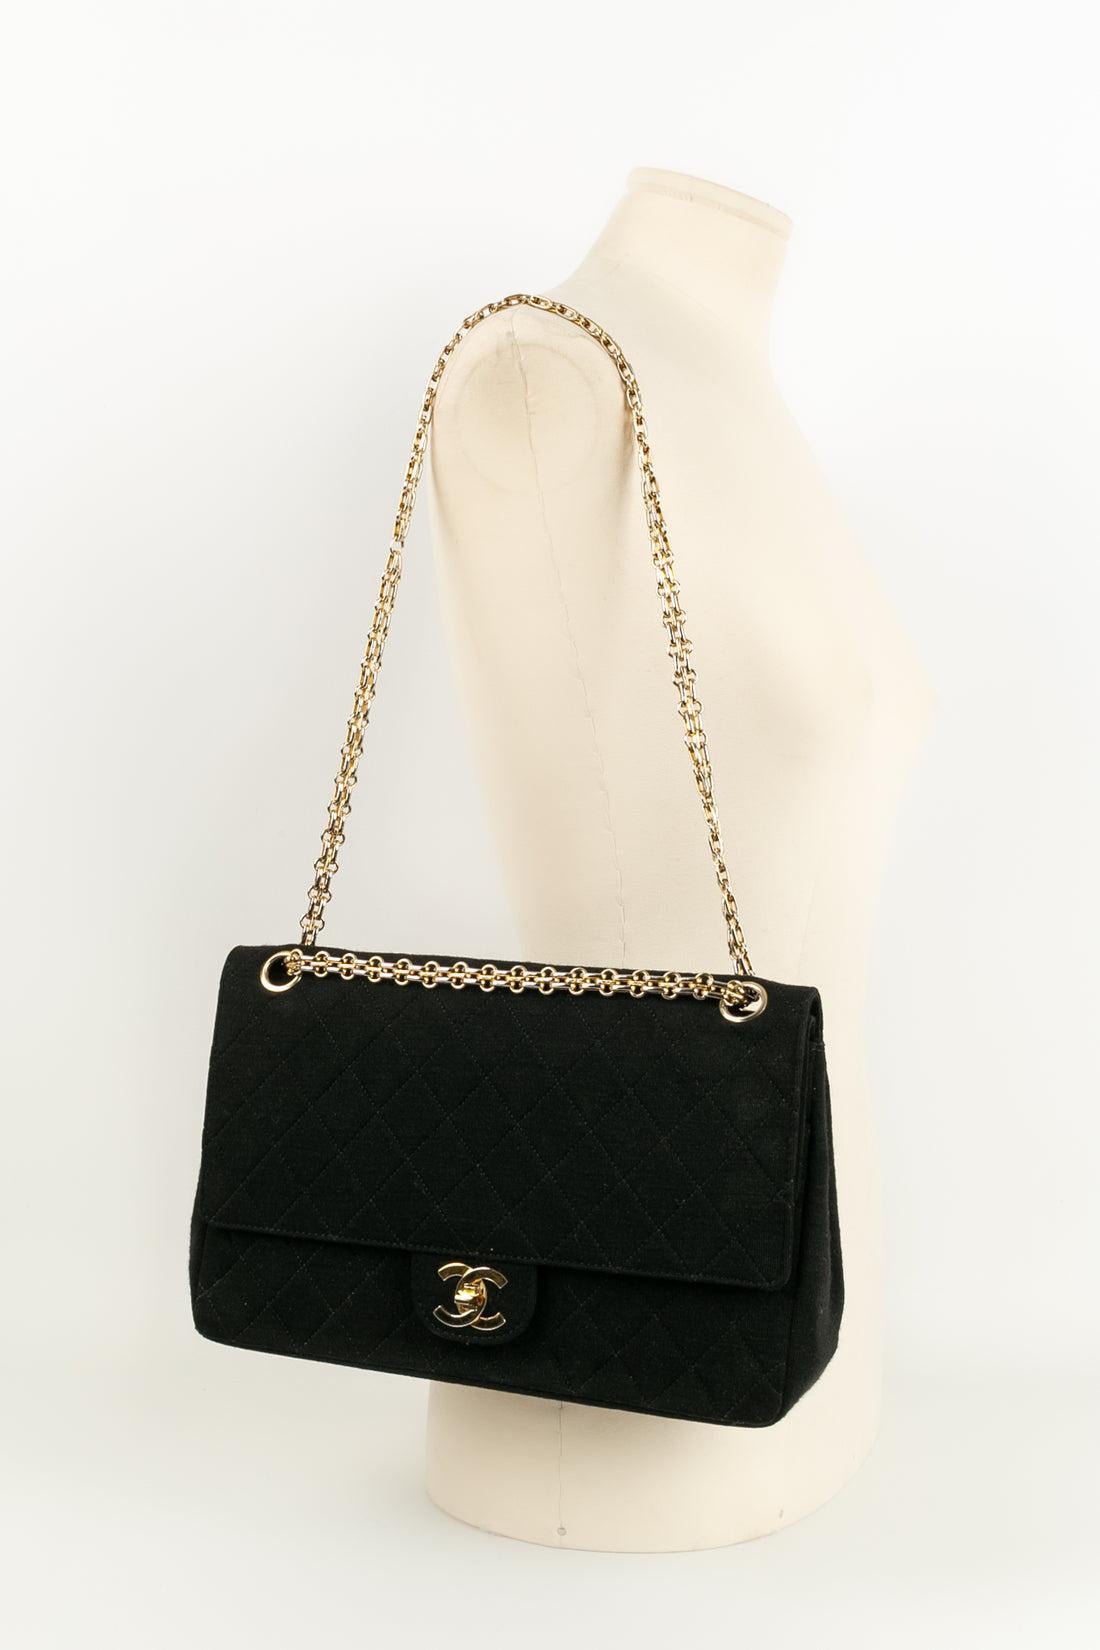 Chanel Black Quilted Jersey Bag For Sale 11